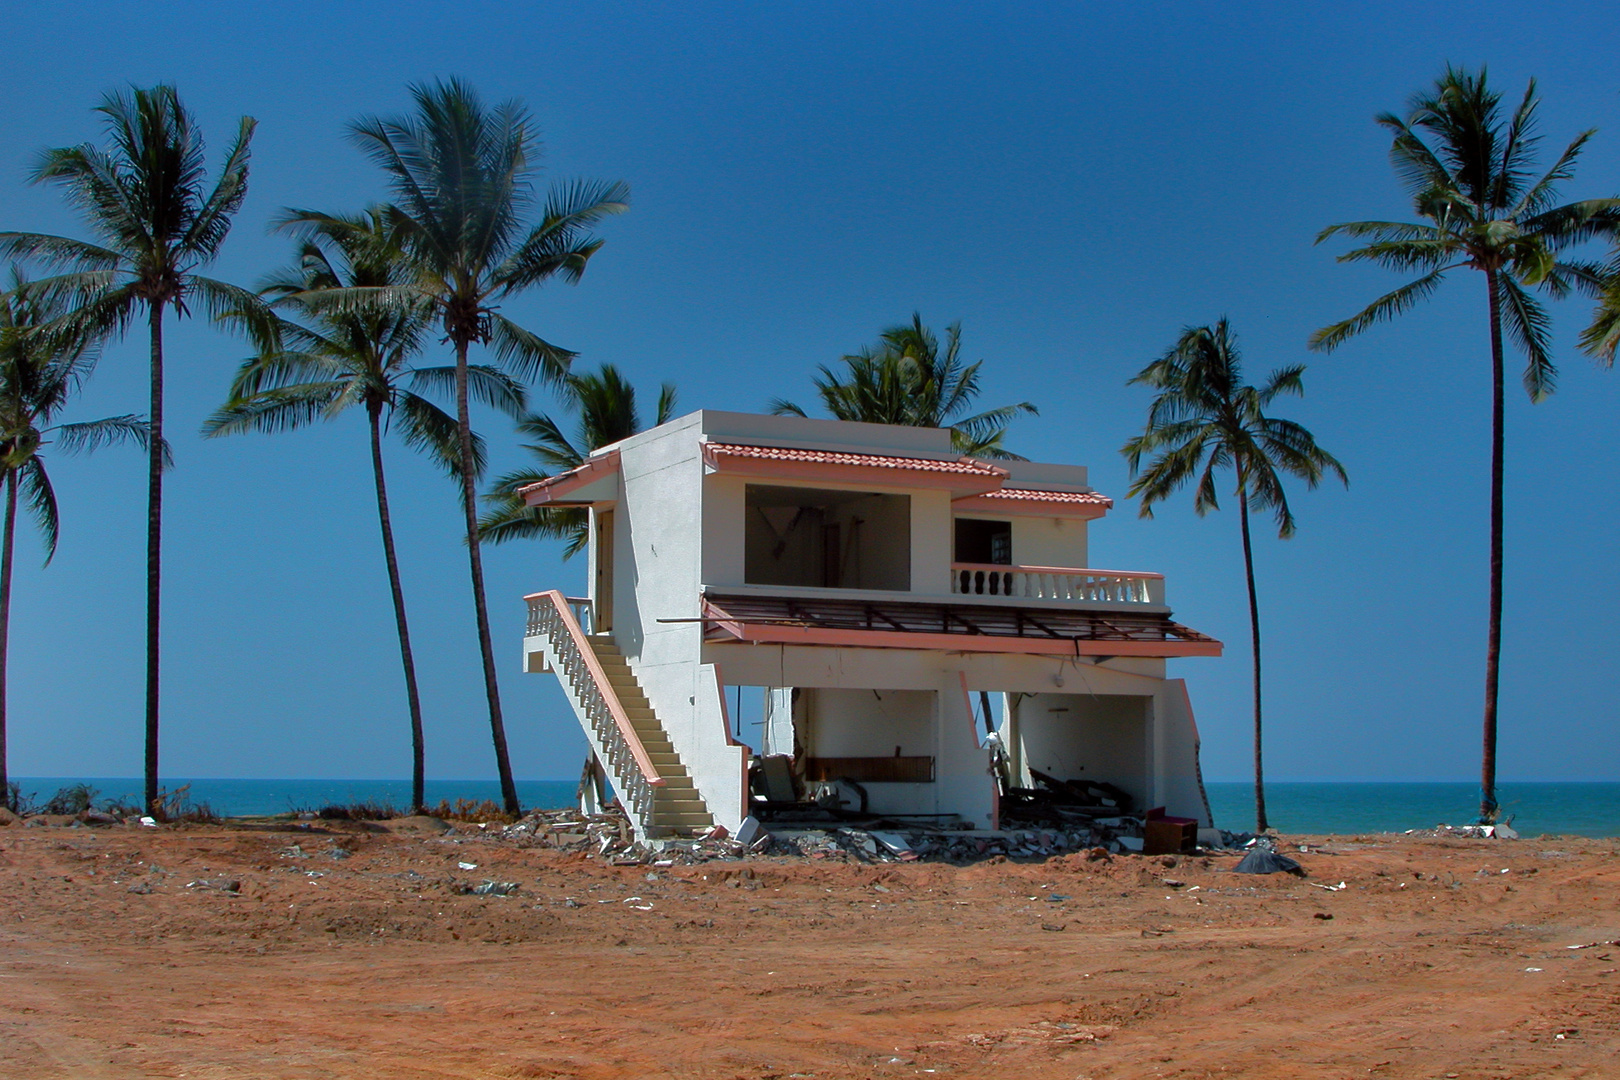 One house remaining only after the tsunami